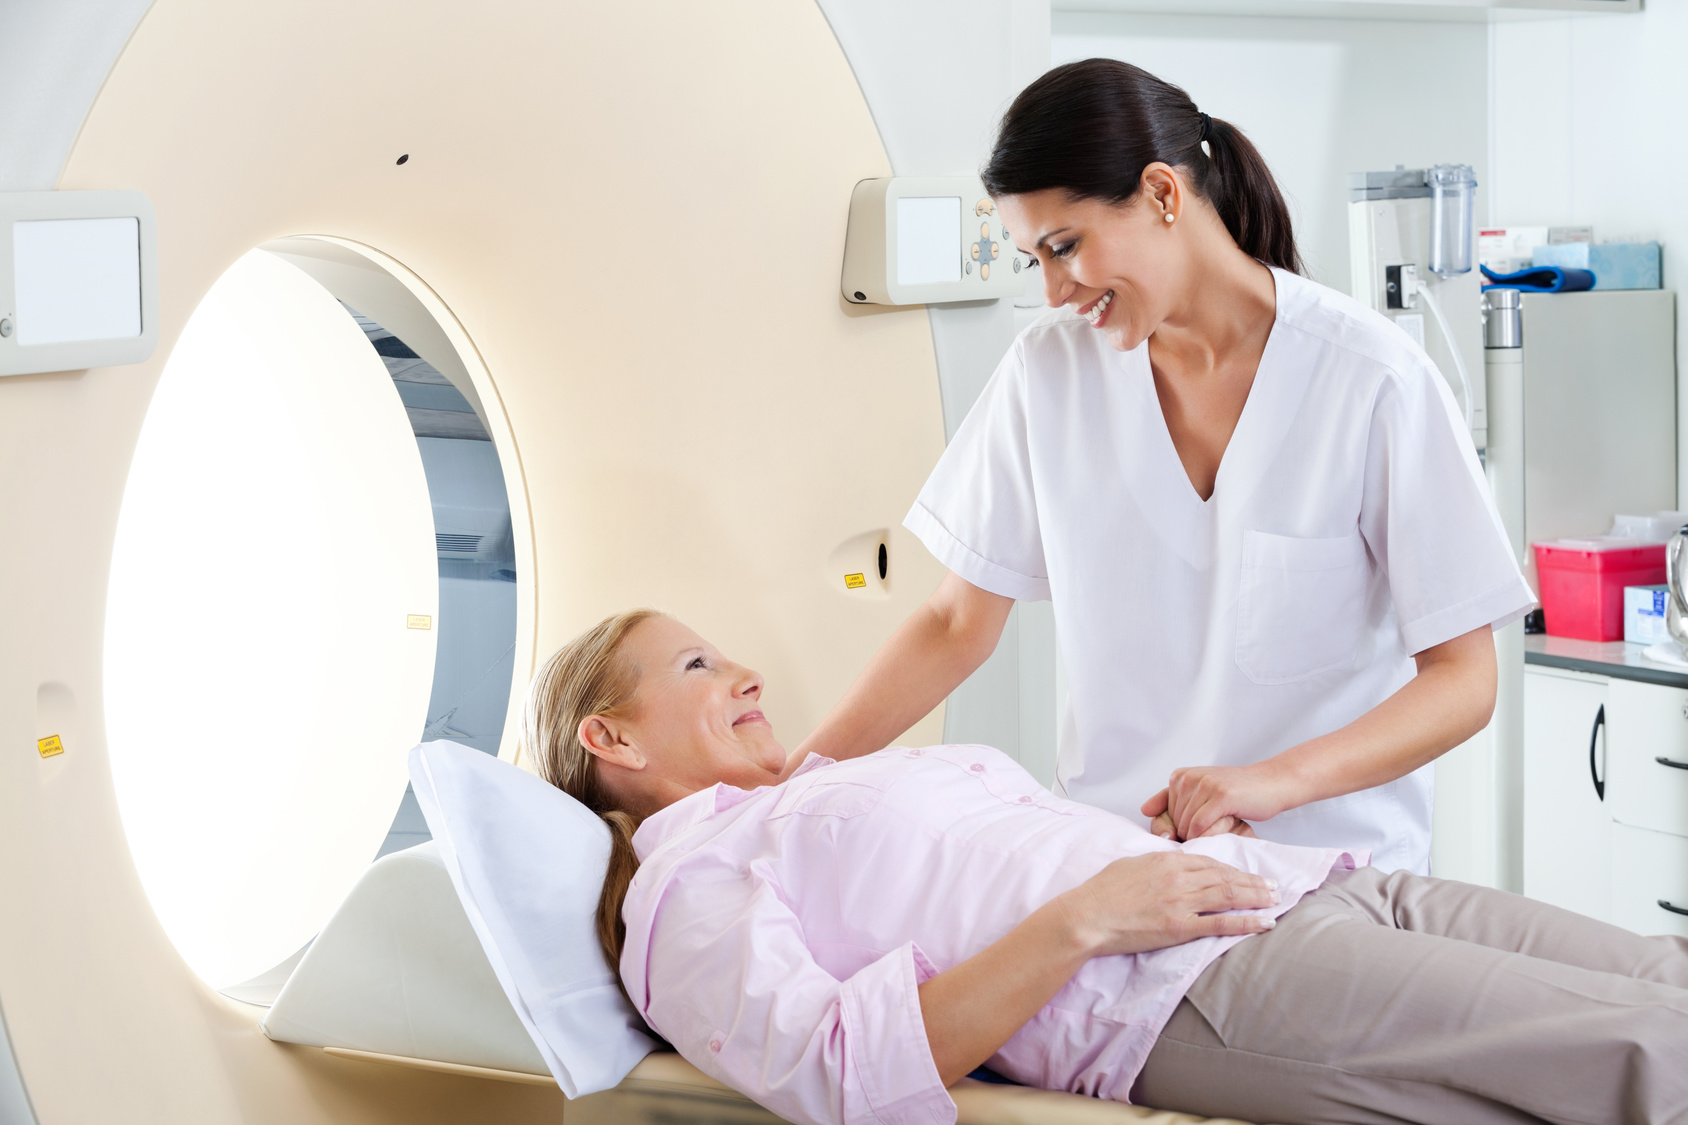 technician talking to patient before scan